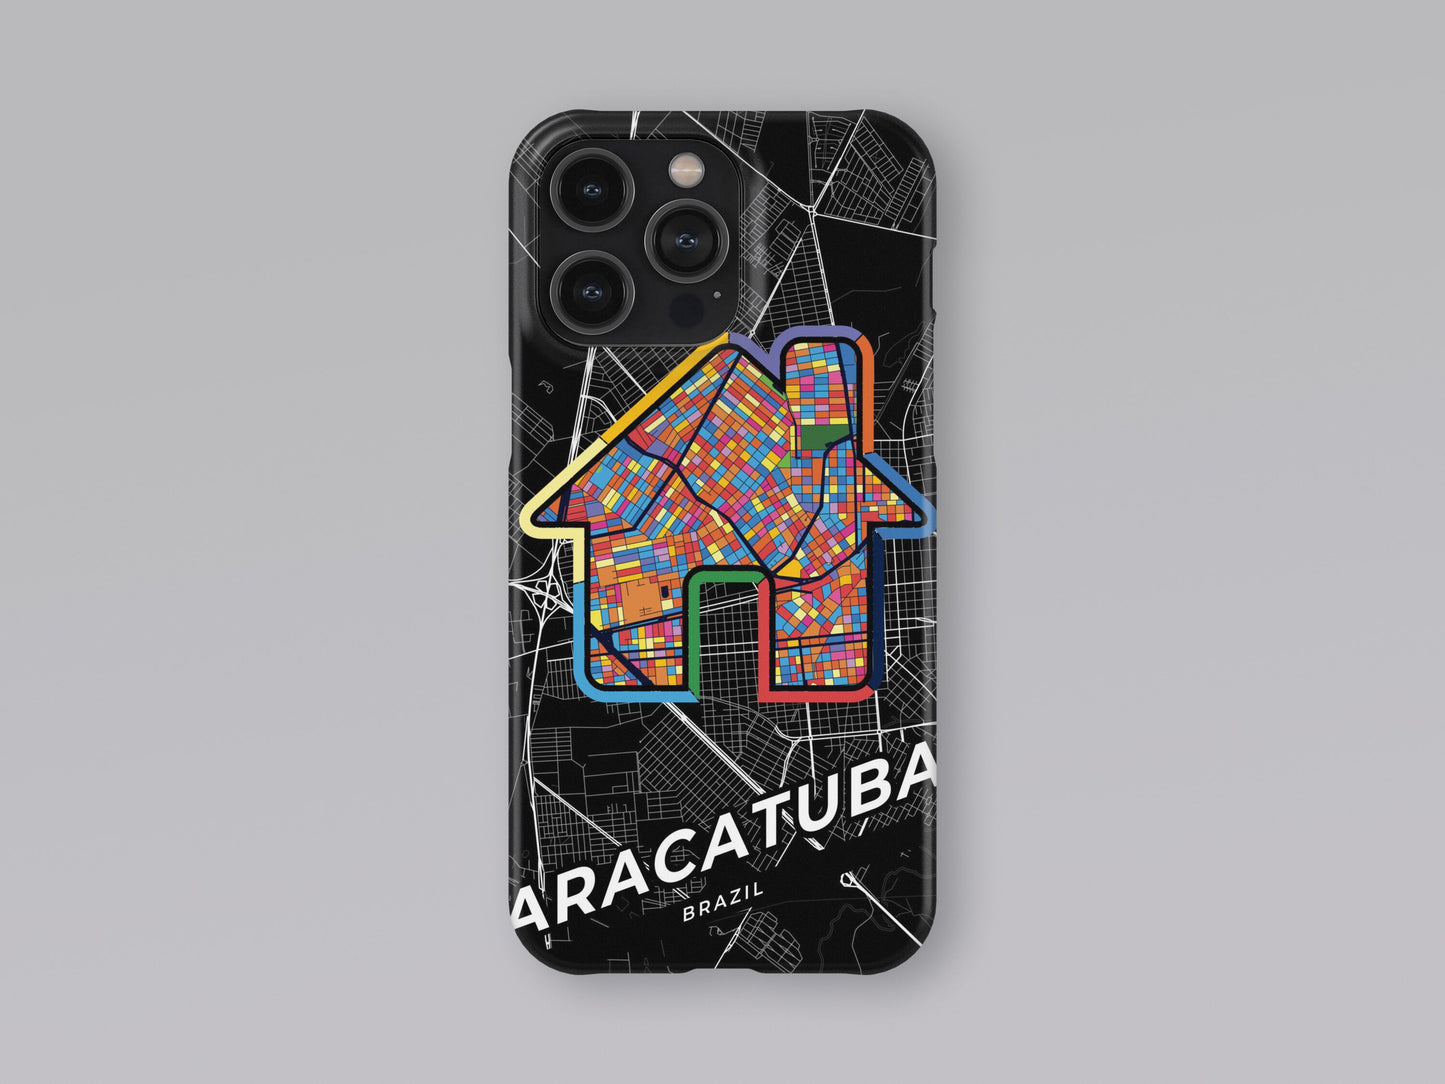 Aracatuba Brazil slim phone case with colorful icon. Birthday, wedding or housewarming gift. Couple match cases. 3